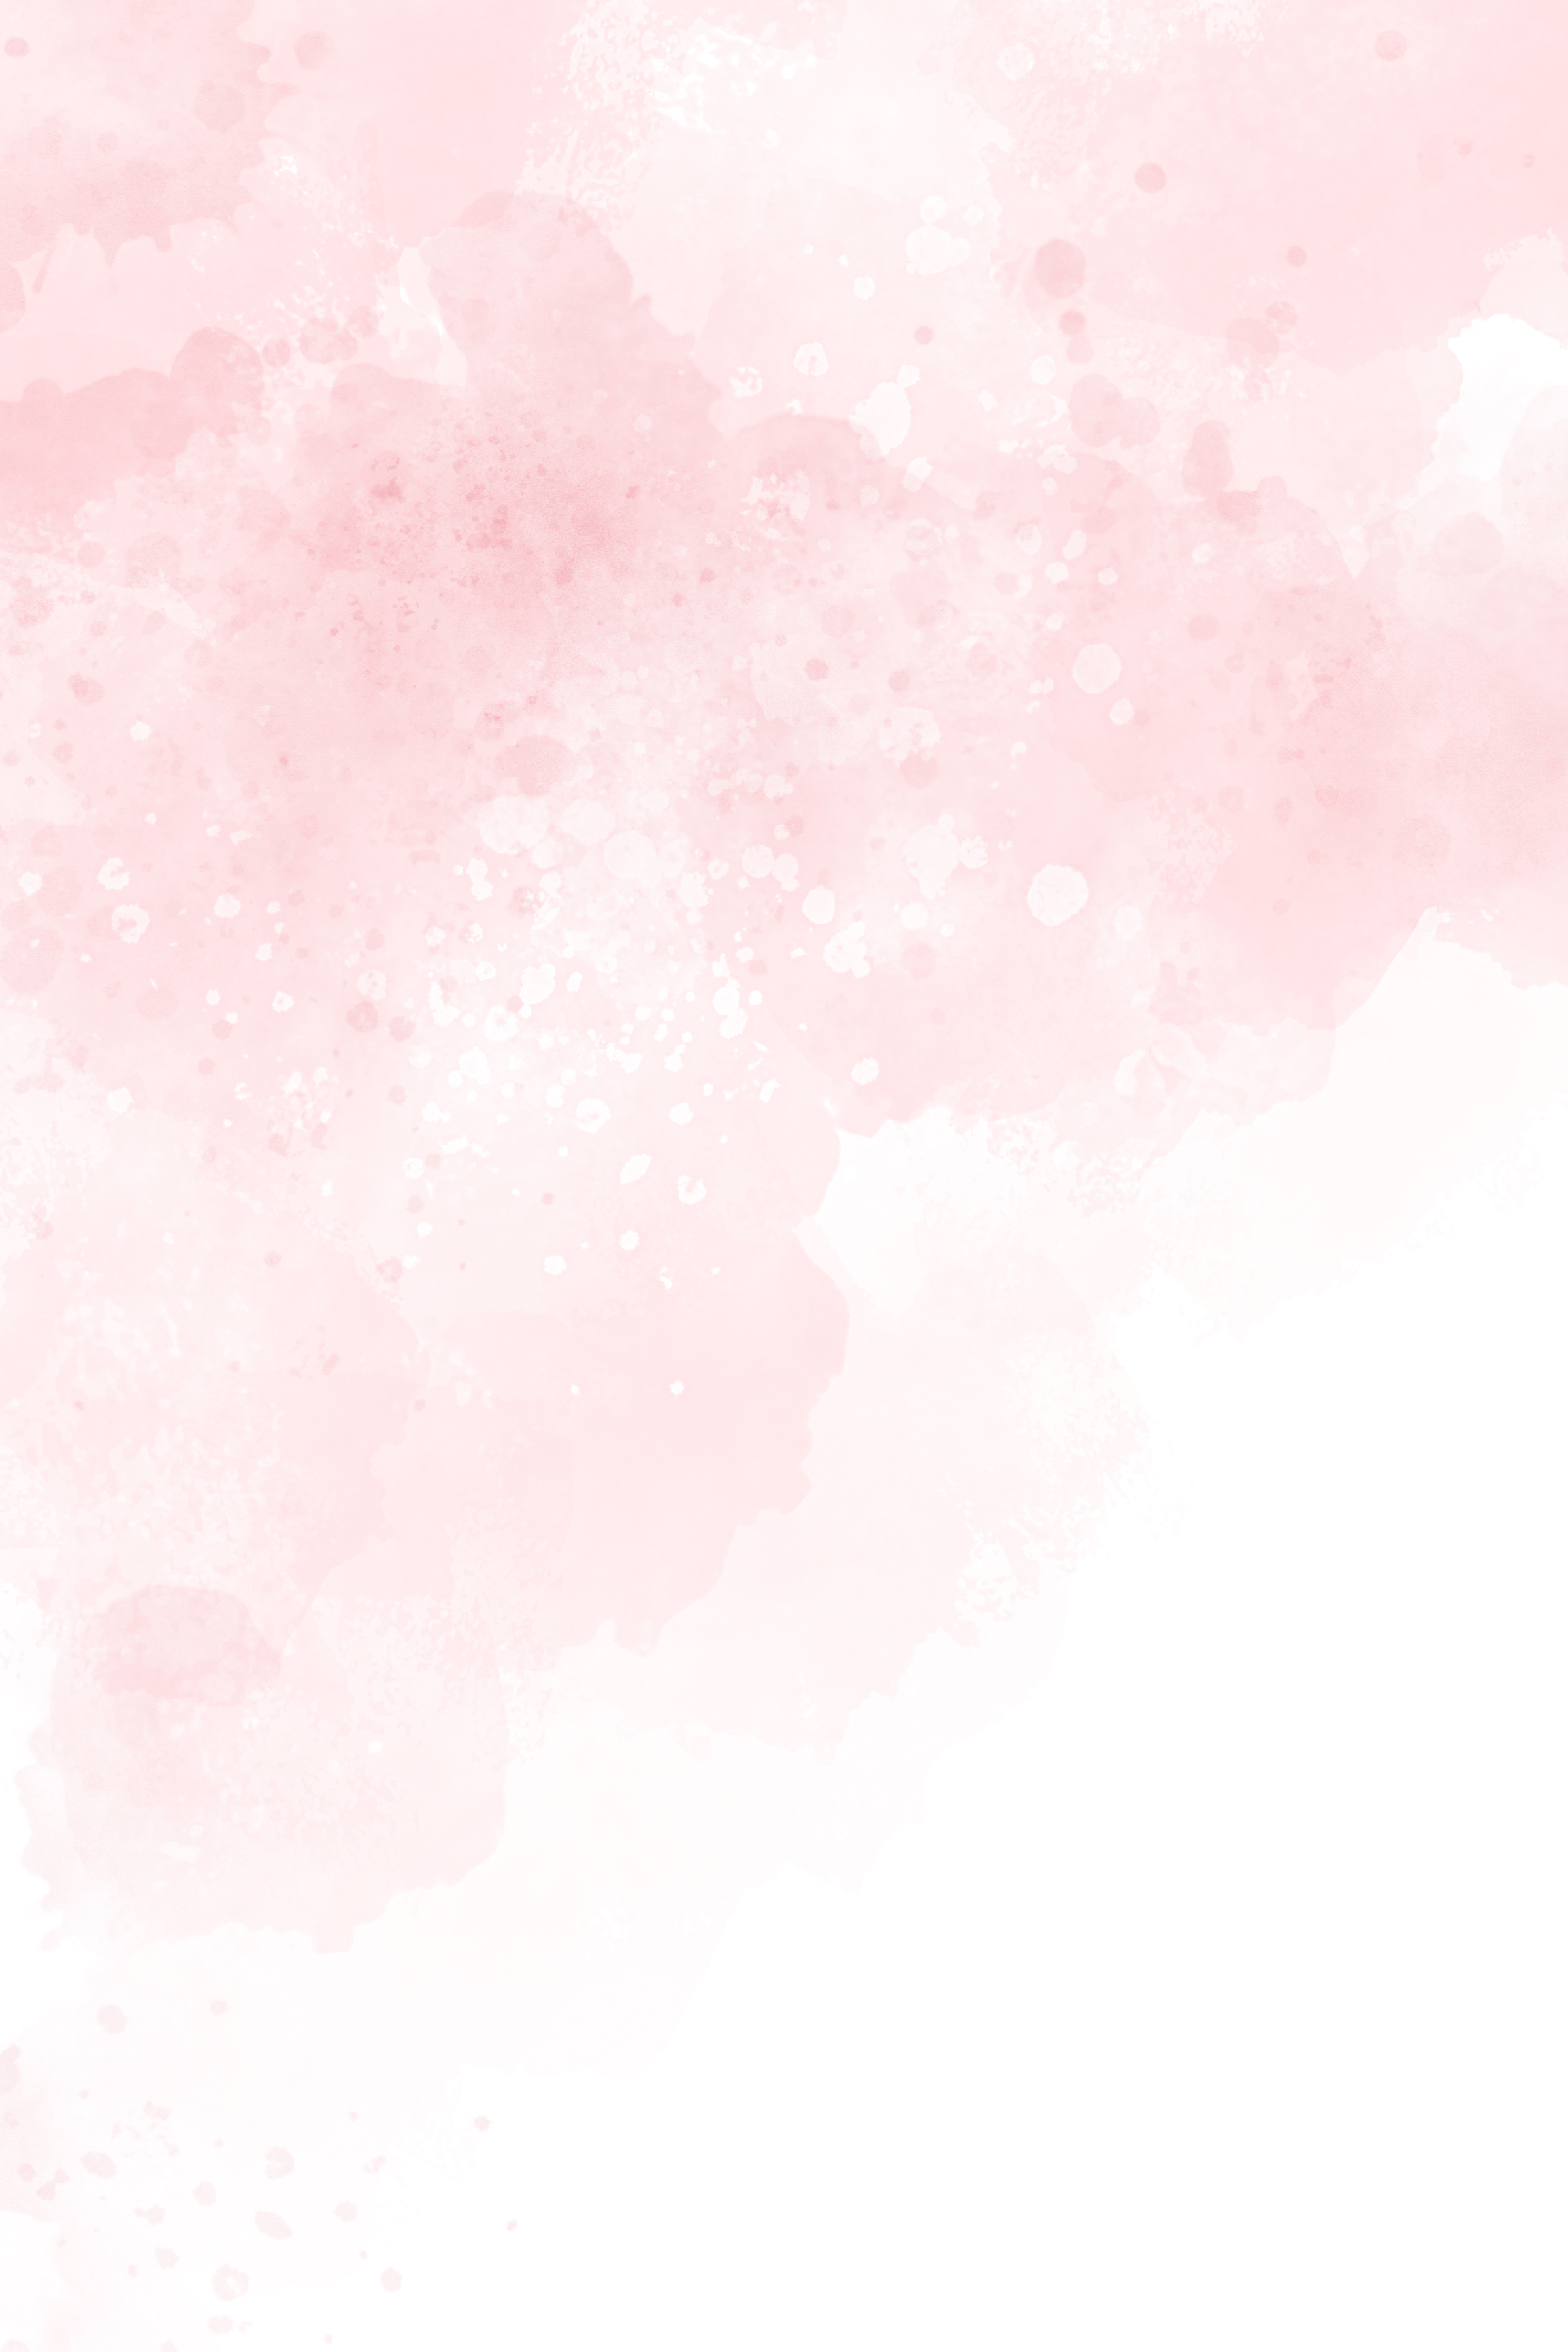 Pink Watercolor Background Abstract Texture with Color Splash Design